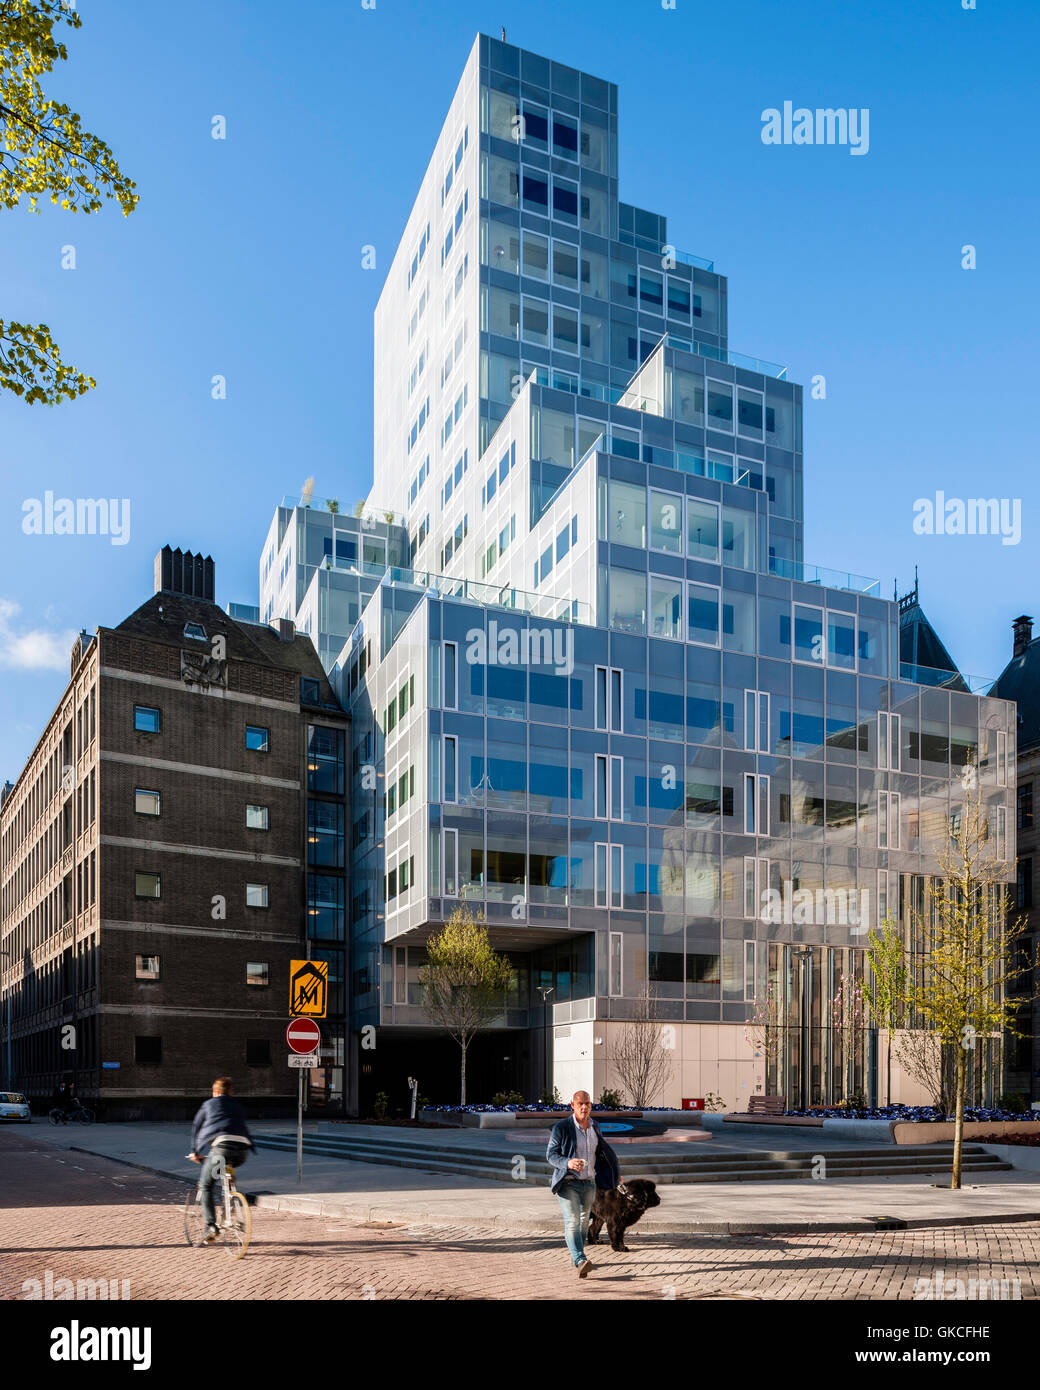 Exterior morning view of rear of building  reflecting old City Council Exterior morning view of rear of building. Timmerhuis, Rotterdam, Netherlands. Architect: OMA Rem Koolhaas, 2015. Stock Photo